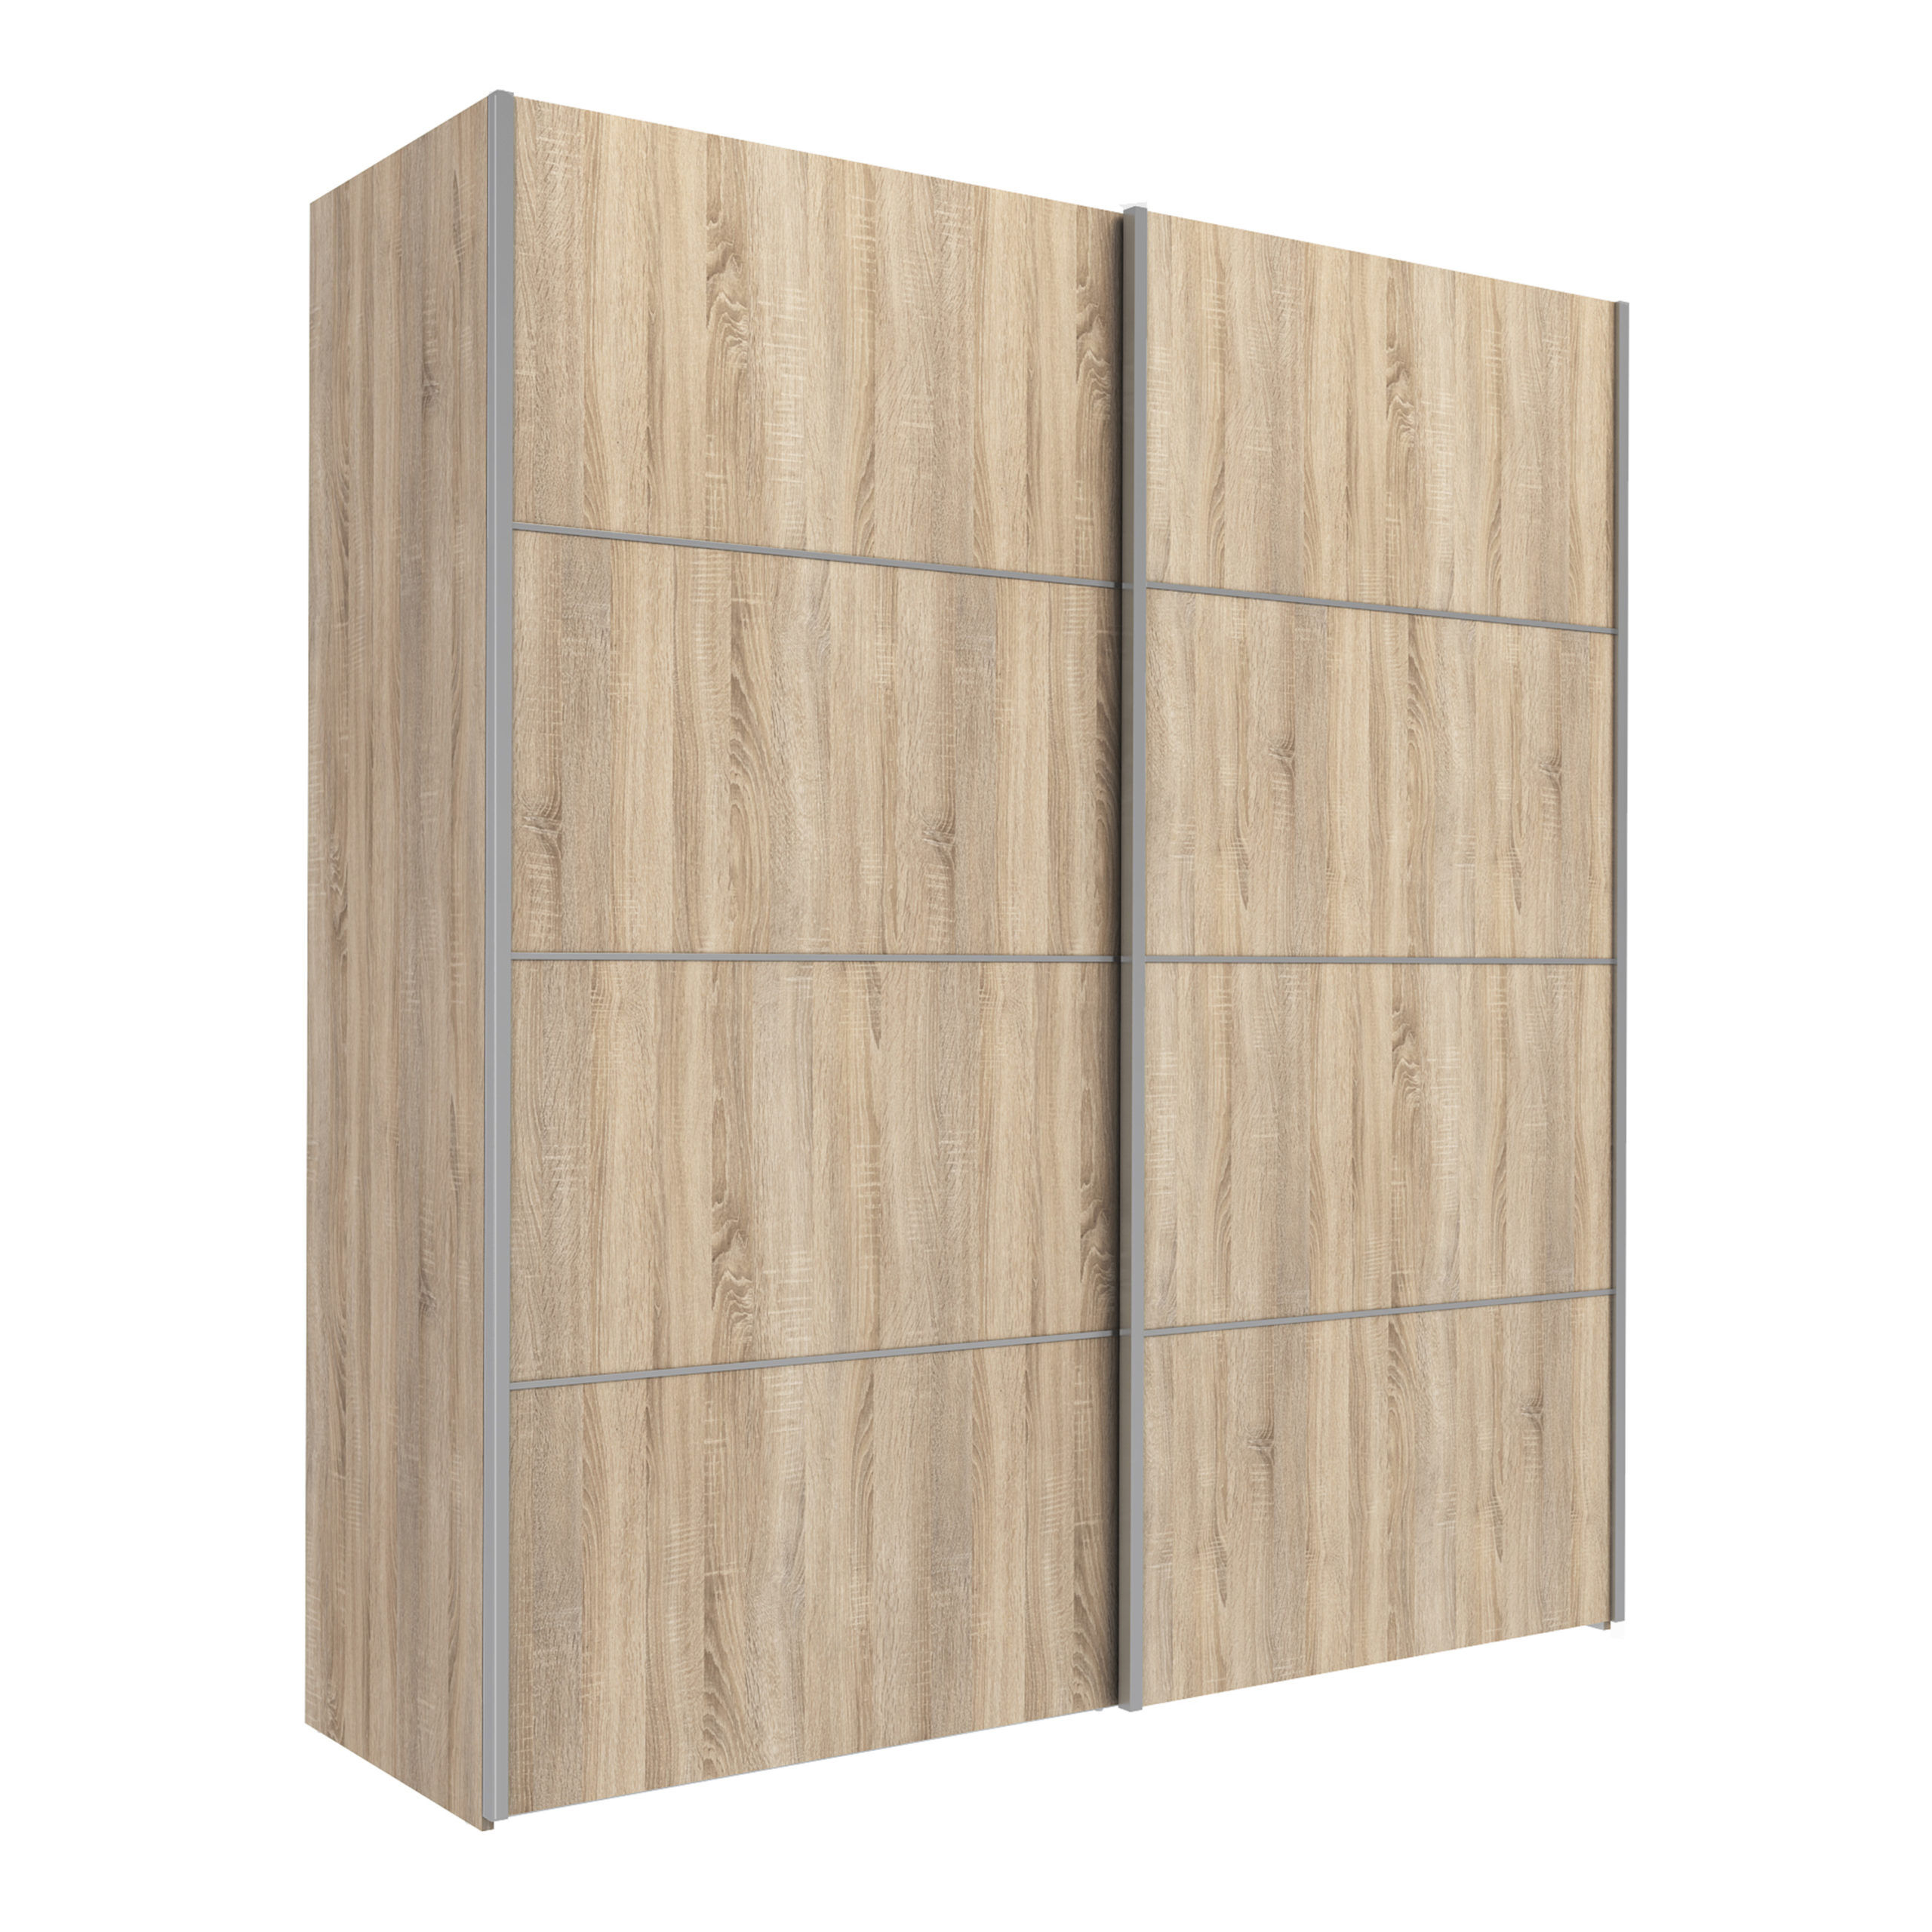 Venice Wardrobe Collection Sliding Wardrobe 180cm in Oak with Oak Doors with 2 Shelves   Self Assembly